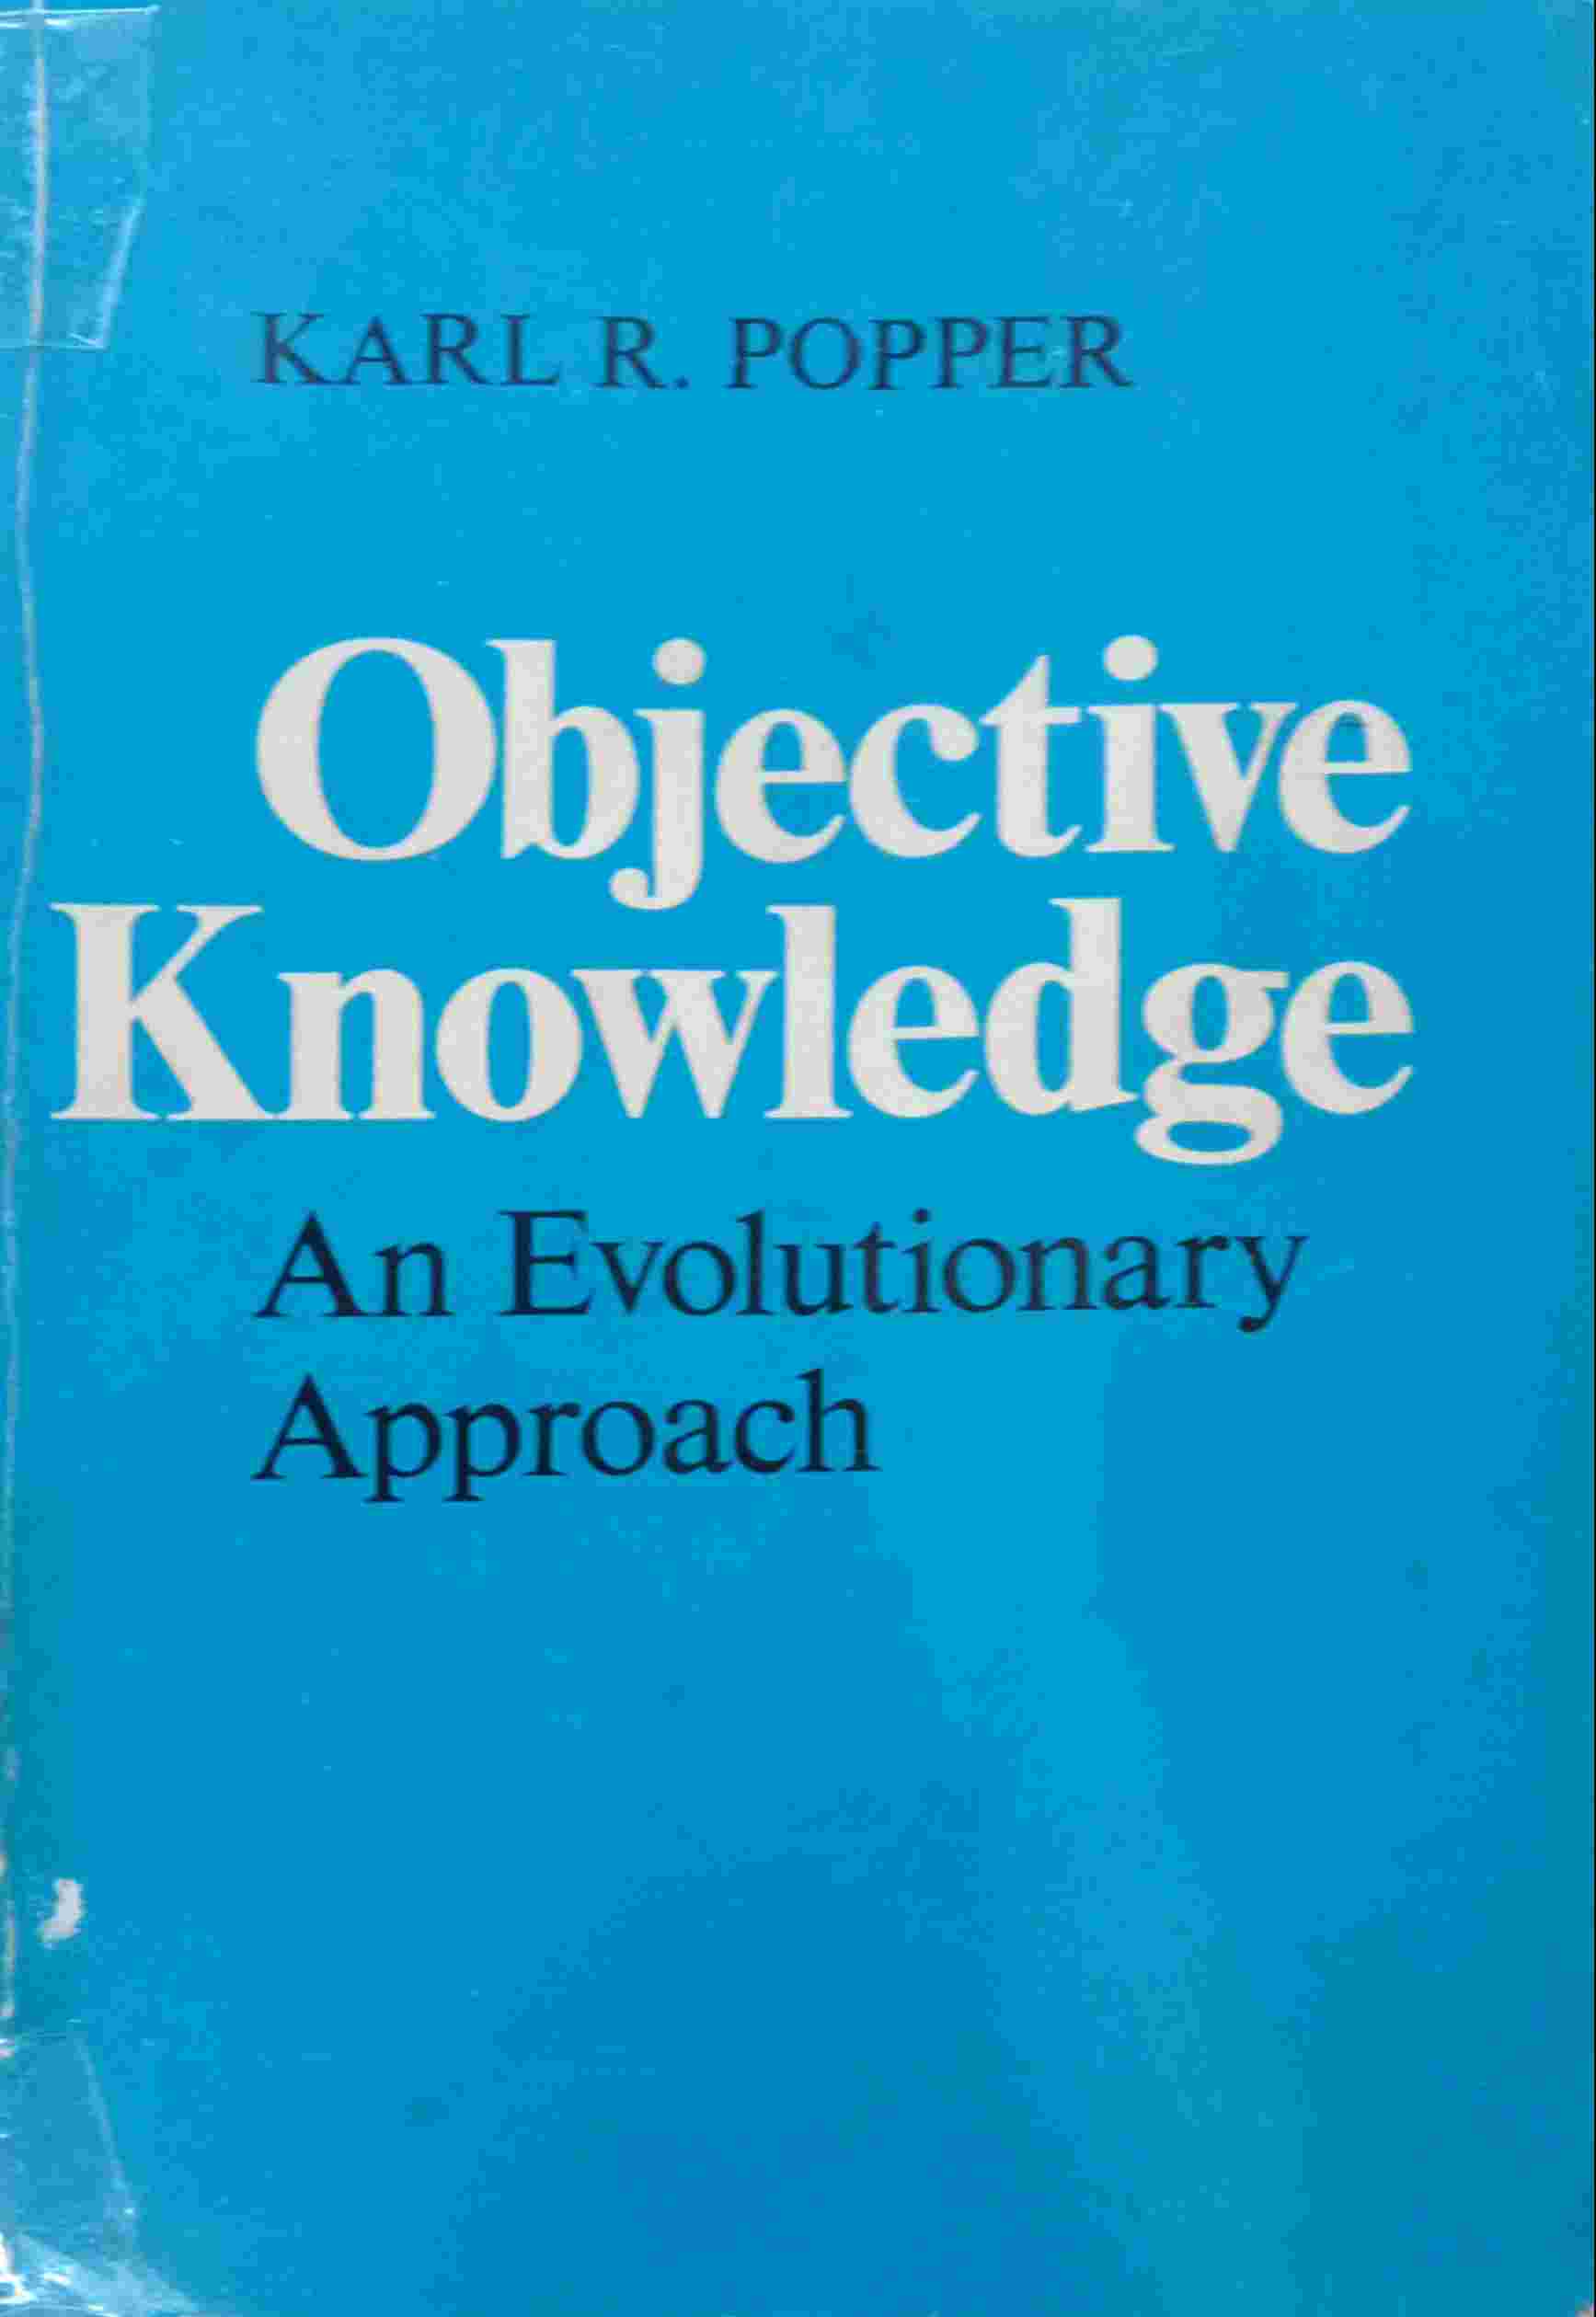 OBJECTIVE KNOWLEDGE